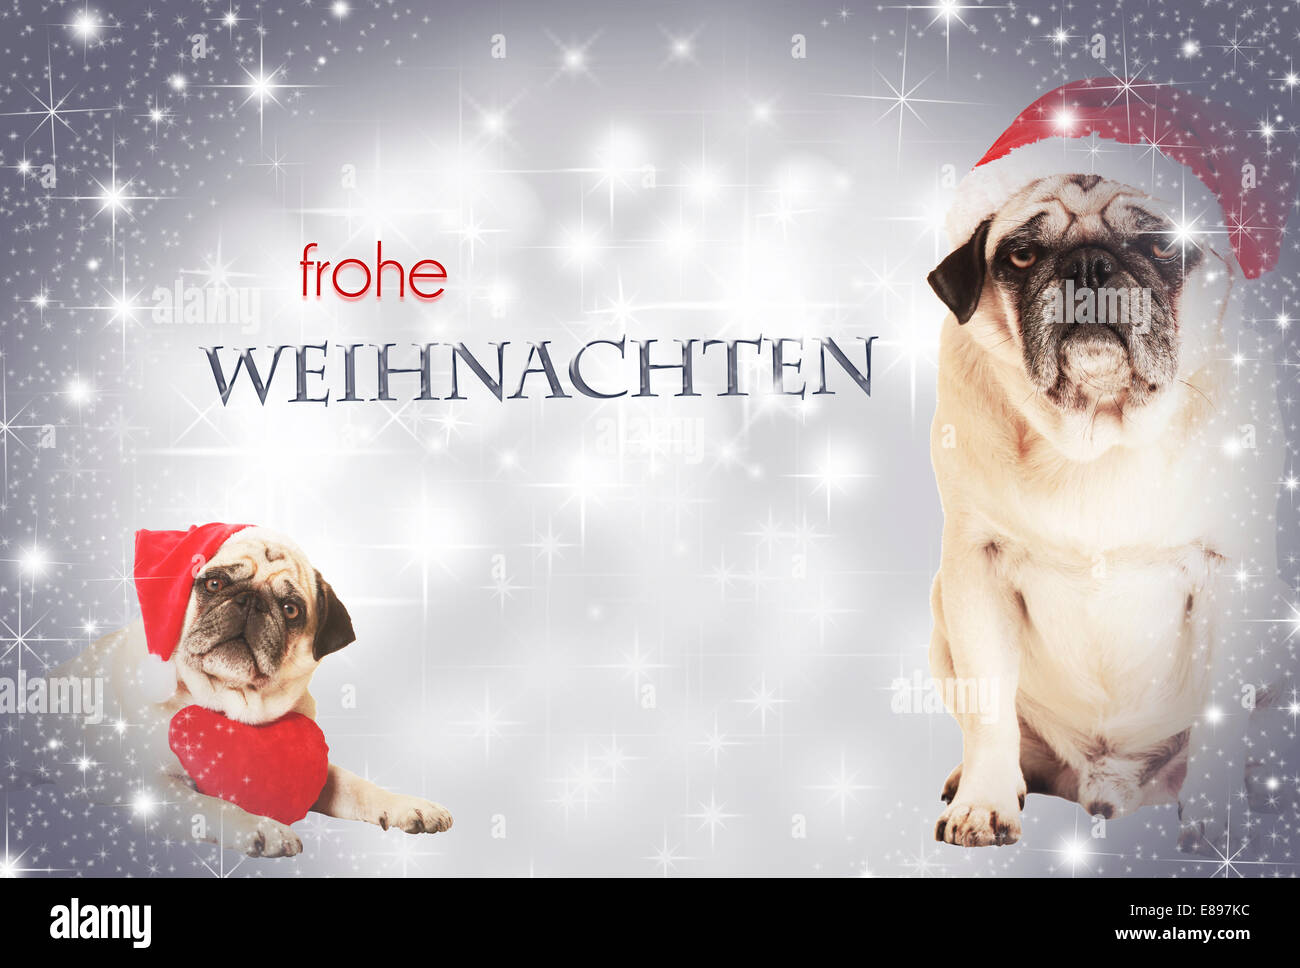 two dogs dressed as Santa Claus before glittering background, with text Frohe Weihnachten Stock Photo